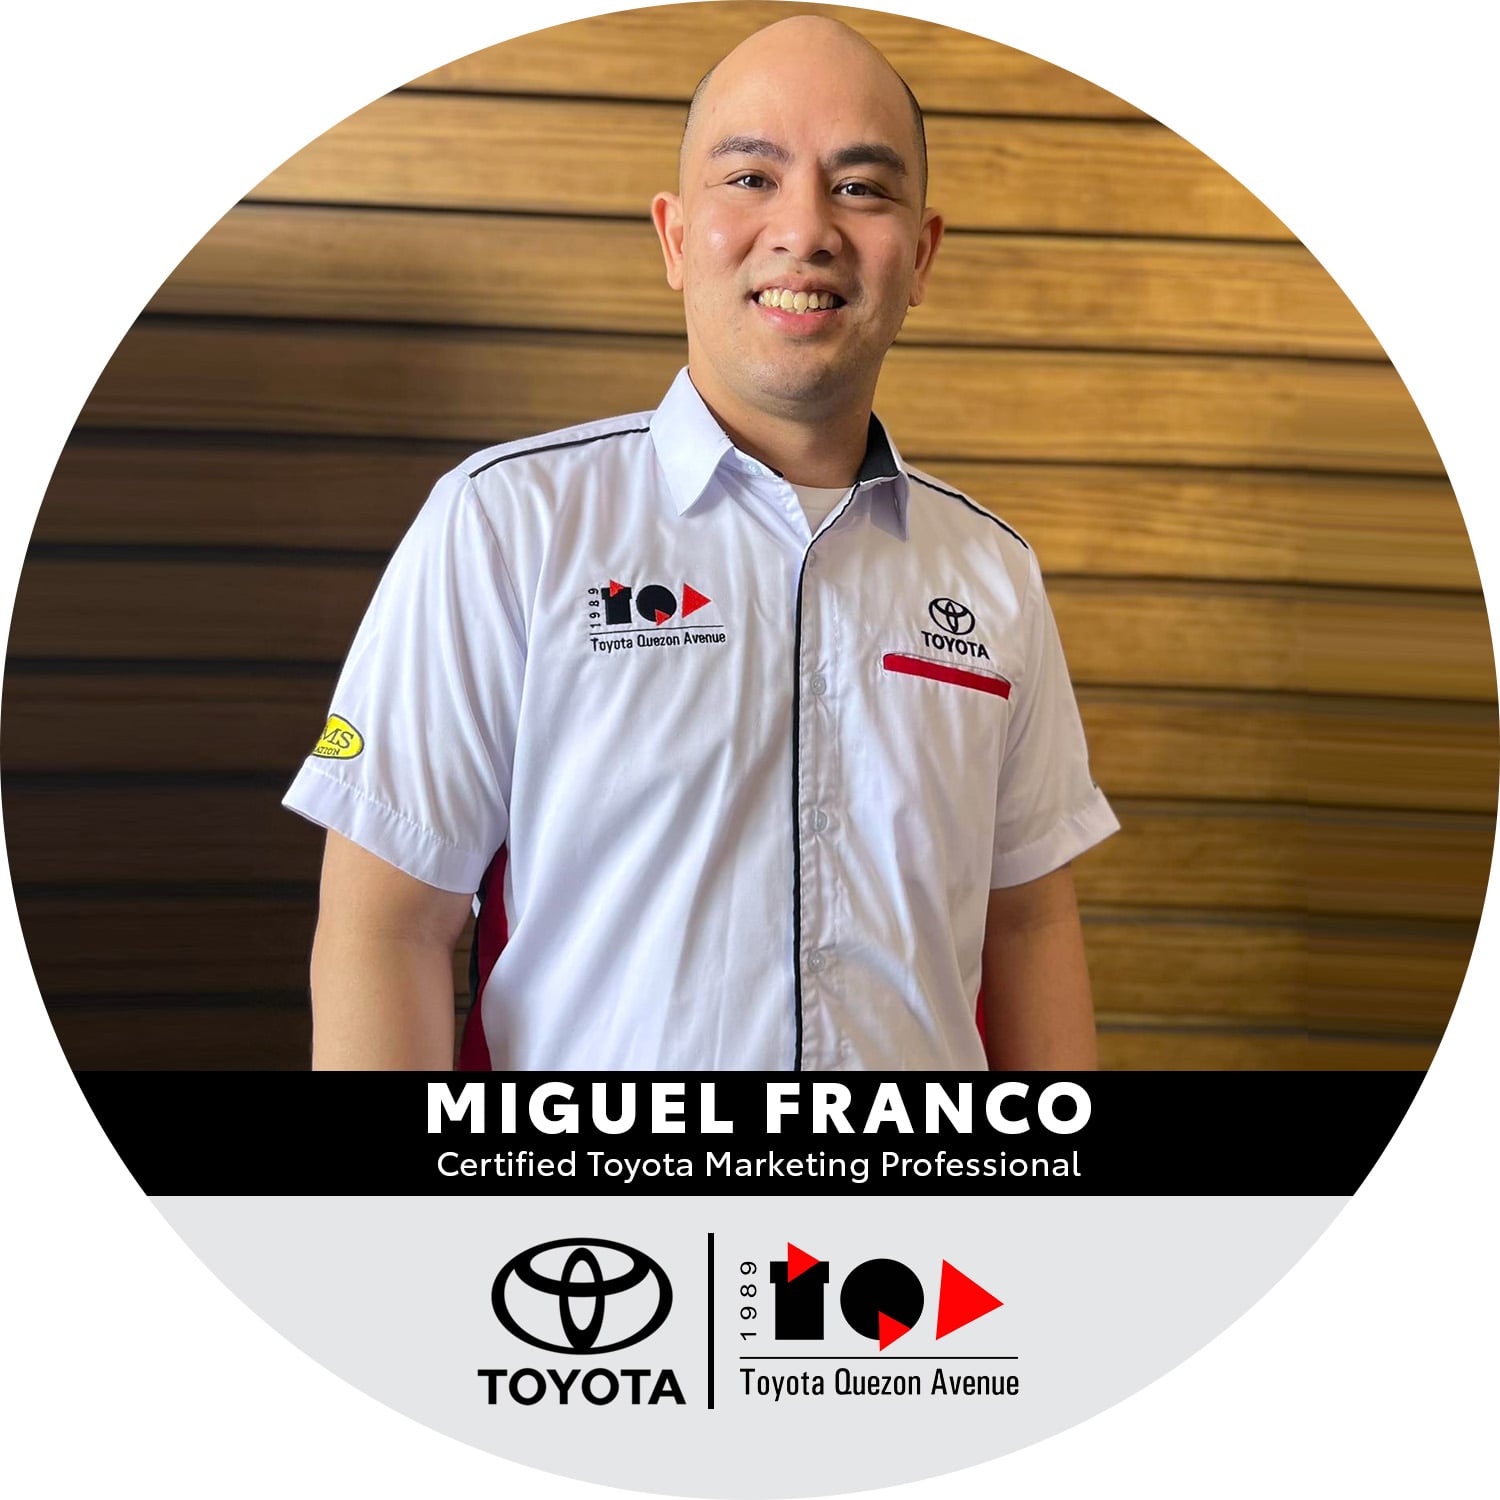 Certified Toyota Marketing Professionals - Miguel Franco